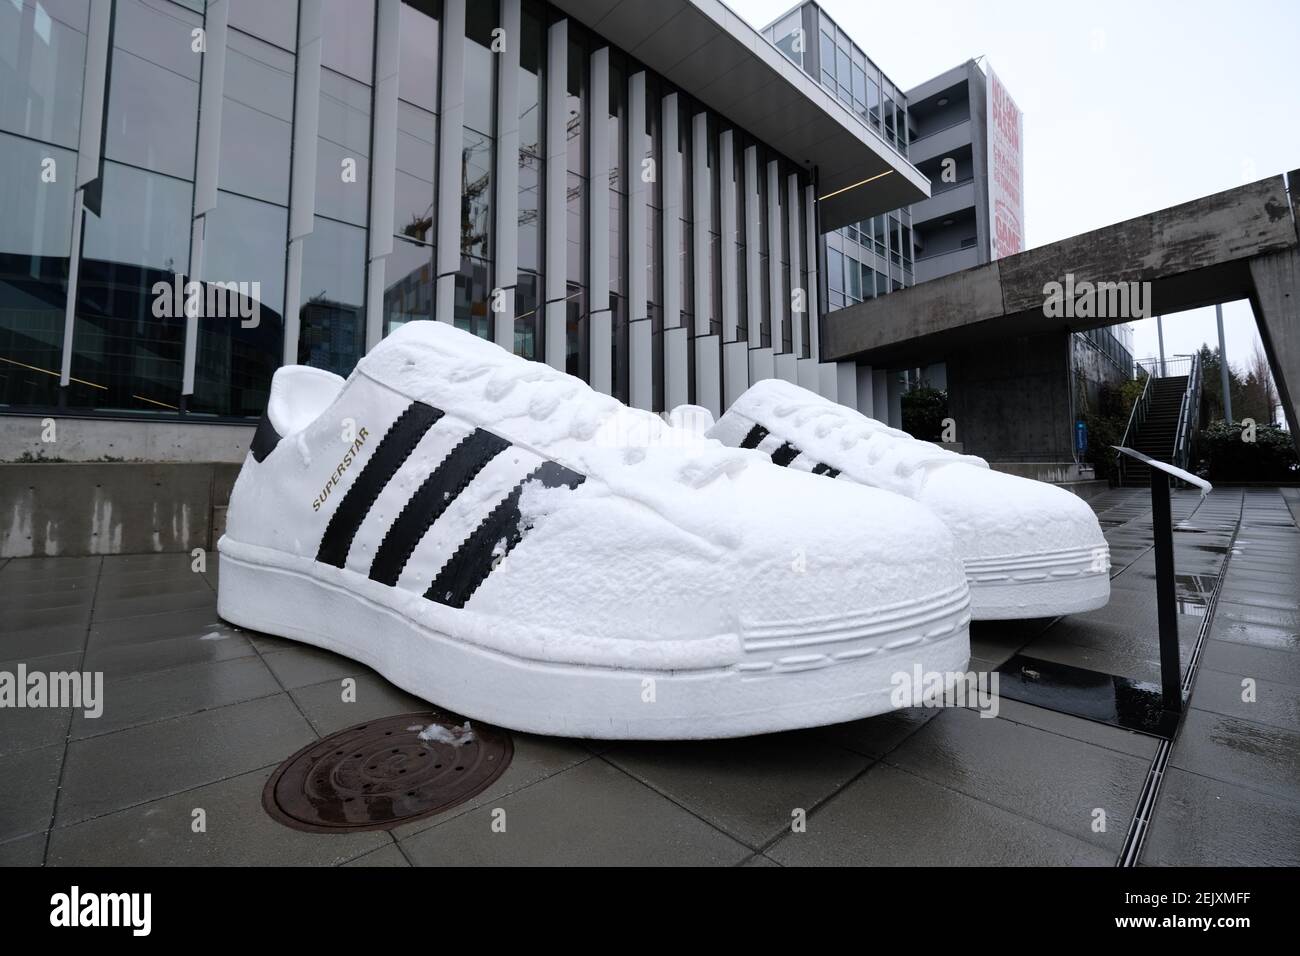 A giant model of Superstar shoes pictured at the Adidas North American  Headquarters in Portland, Ore., on March 14, 2020. The German shoe company  closed all stores in North America and Europe